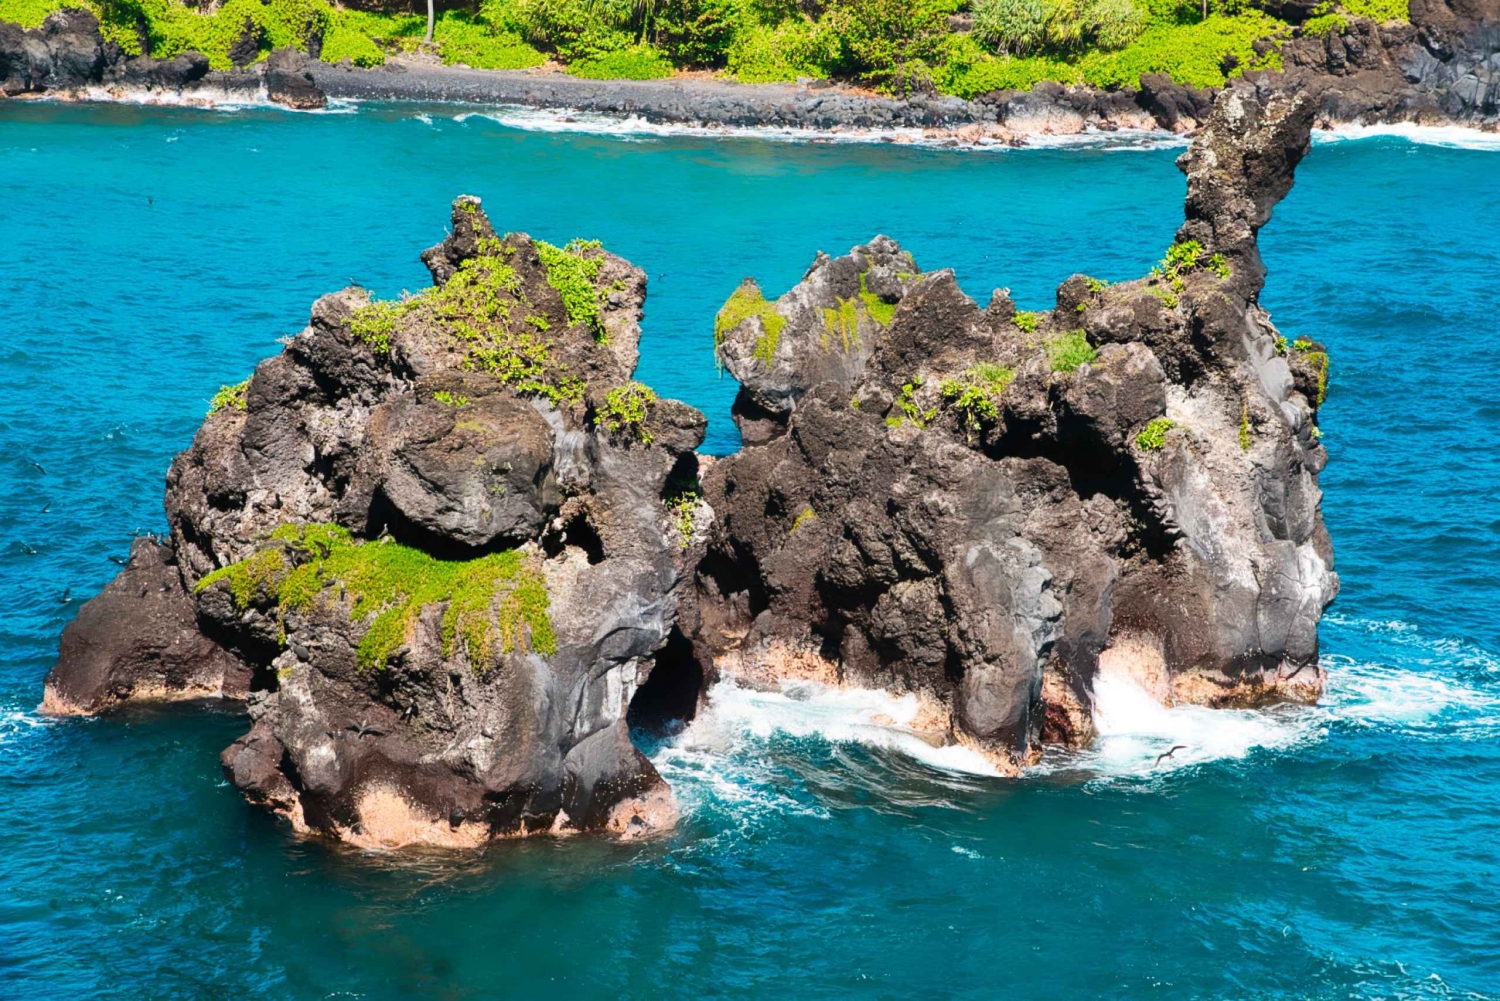 Maui: Private Luxury Road to Hana with Included Meals